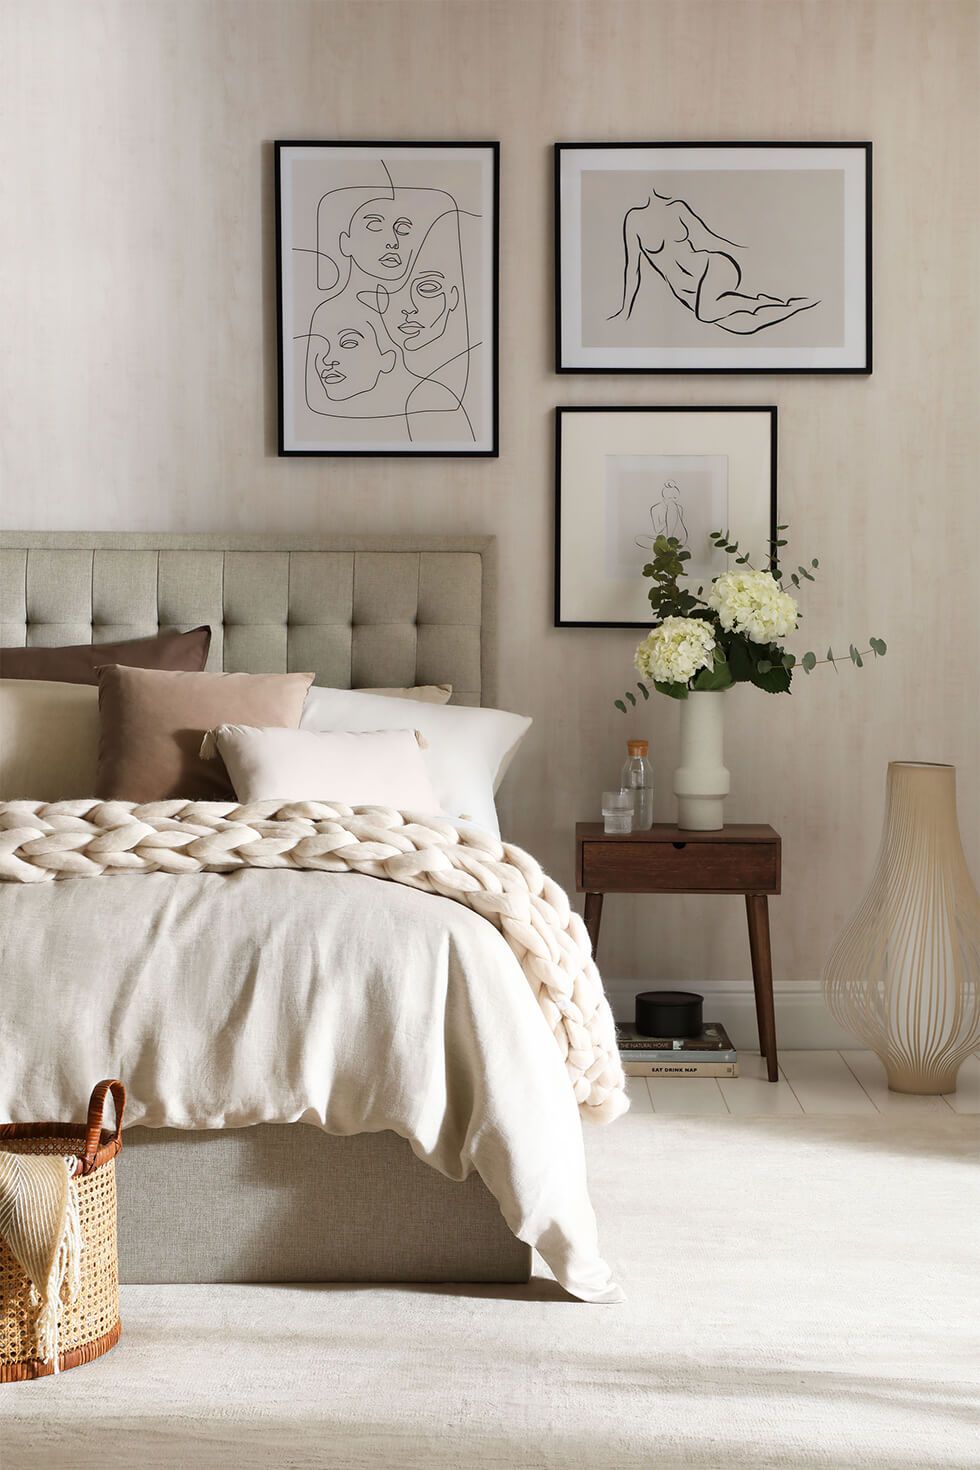 Small bedroom with a simple layout and neutral palette